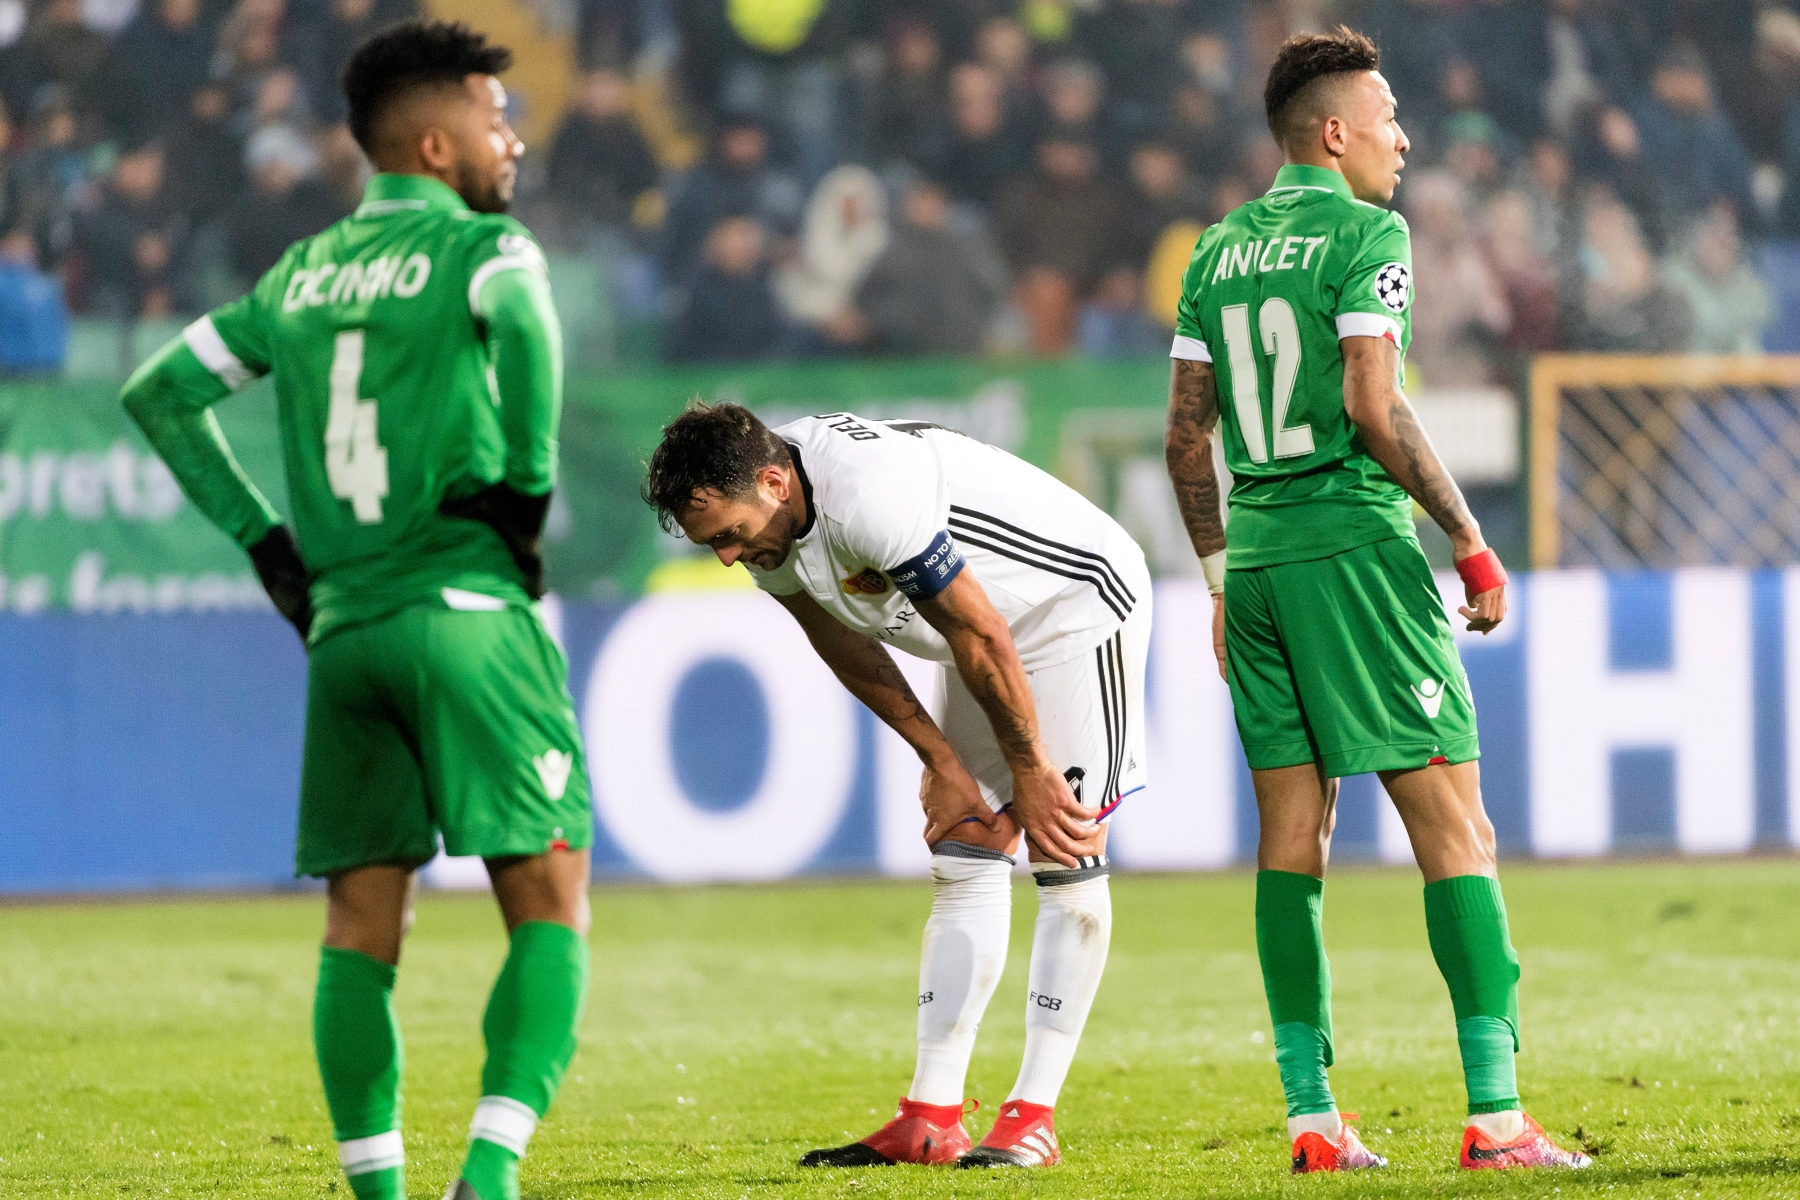 Basel's Matias Delgado, center, reacts during an UEFA Champions League Group stage Group A matchday 5 soccer match between Bulgaria's PFC Ludogorets Razgrad and Switzerland's FC Basel 1893 in the Natsionalen Stadion Vasil Levski in Sofia, Bulgaria, on Wednesday, November 23, 2016. (KEYSTONE/Georgios Kefalas) BULGARIA SOCCER CHAMPIONS LEAGUE LUDOGORETS BASEL